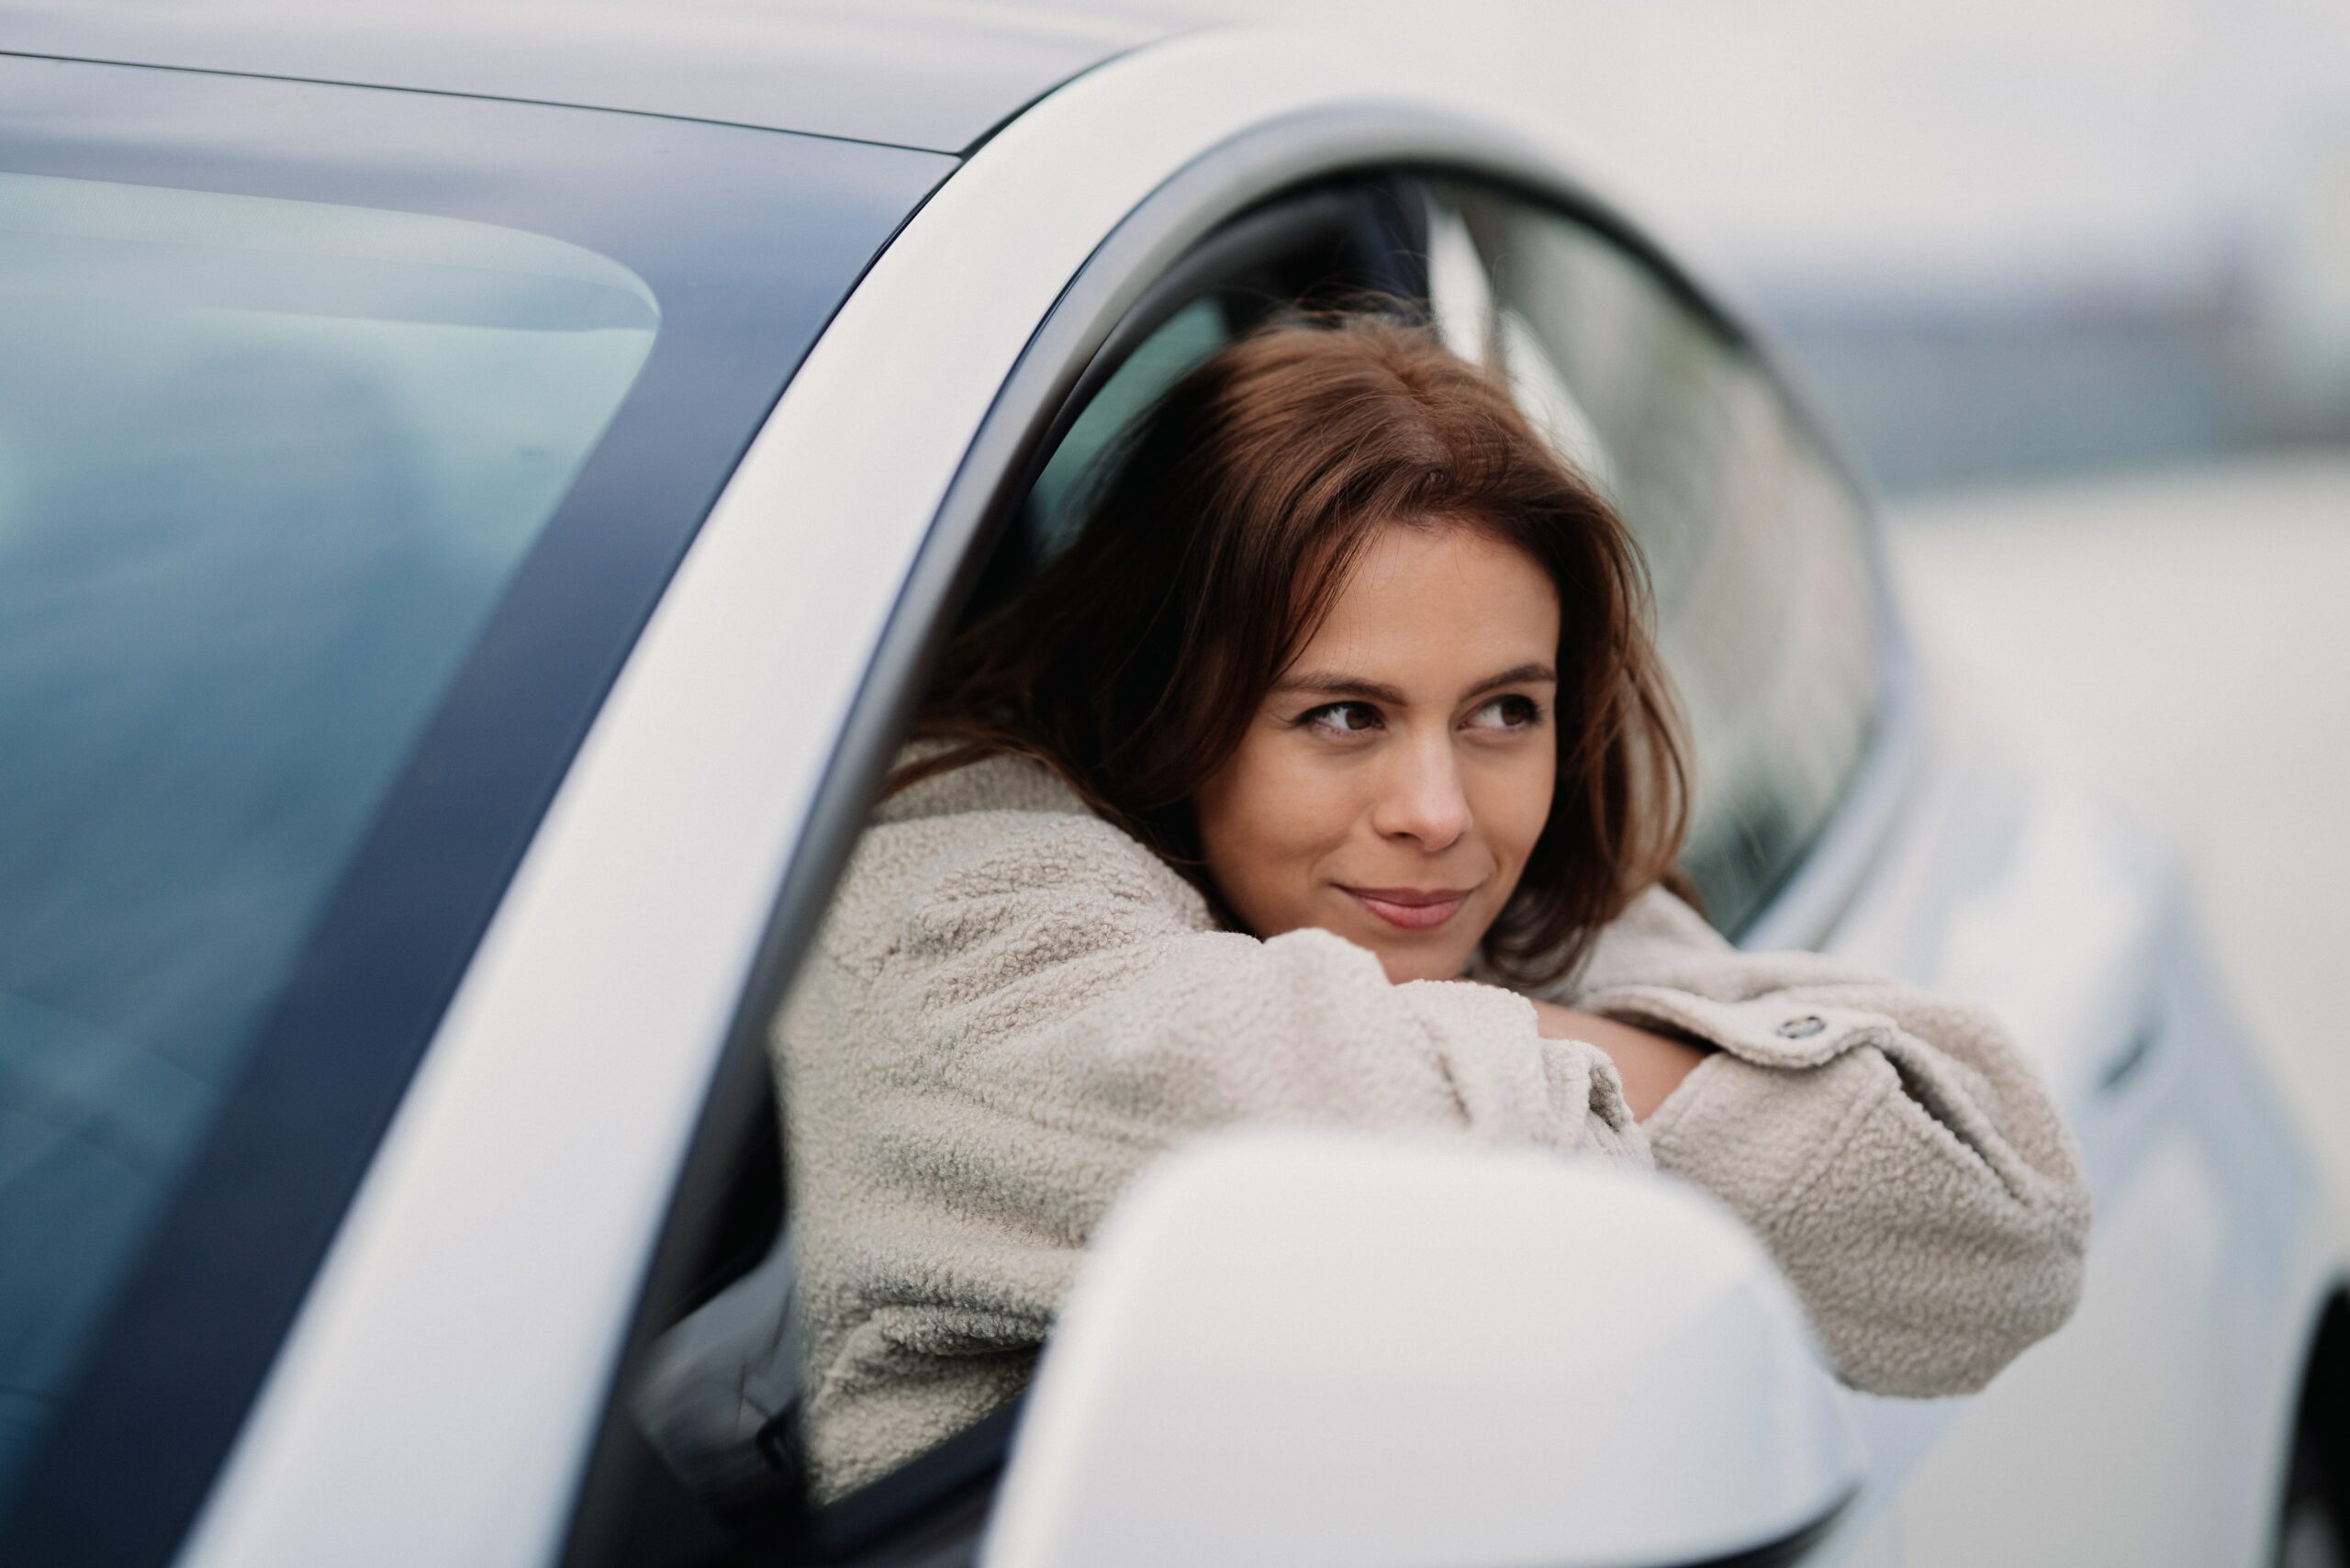 A woman leaning out of the window of a car, enjoying the freedom of a lease.